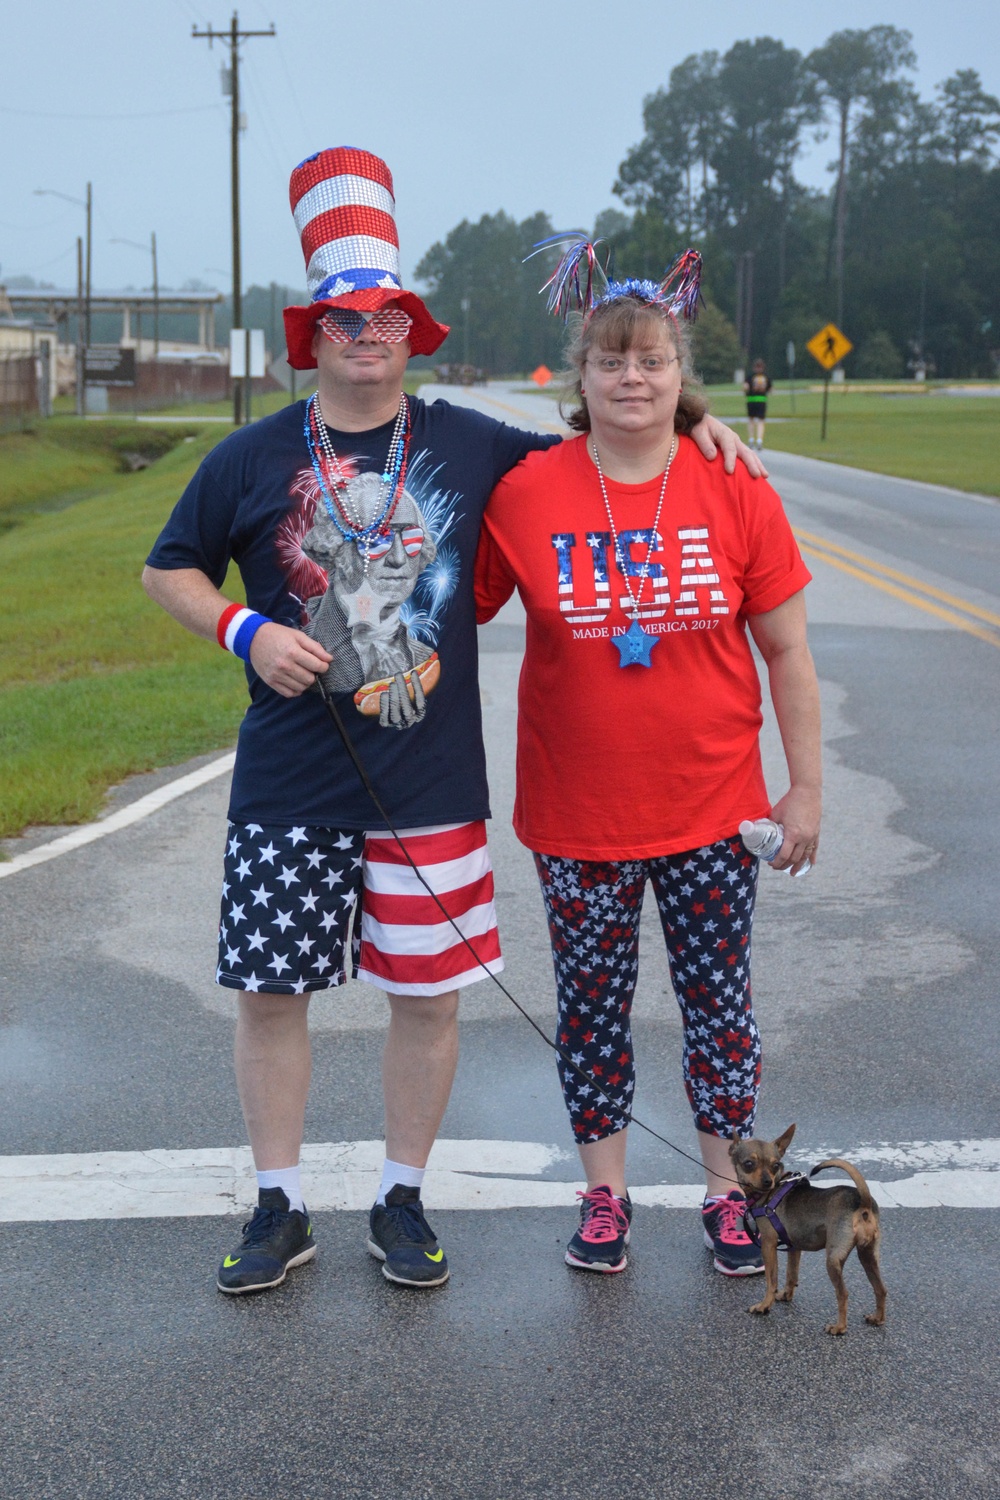 STB conducts red, white and blue fun run